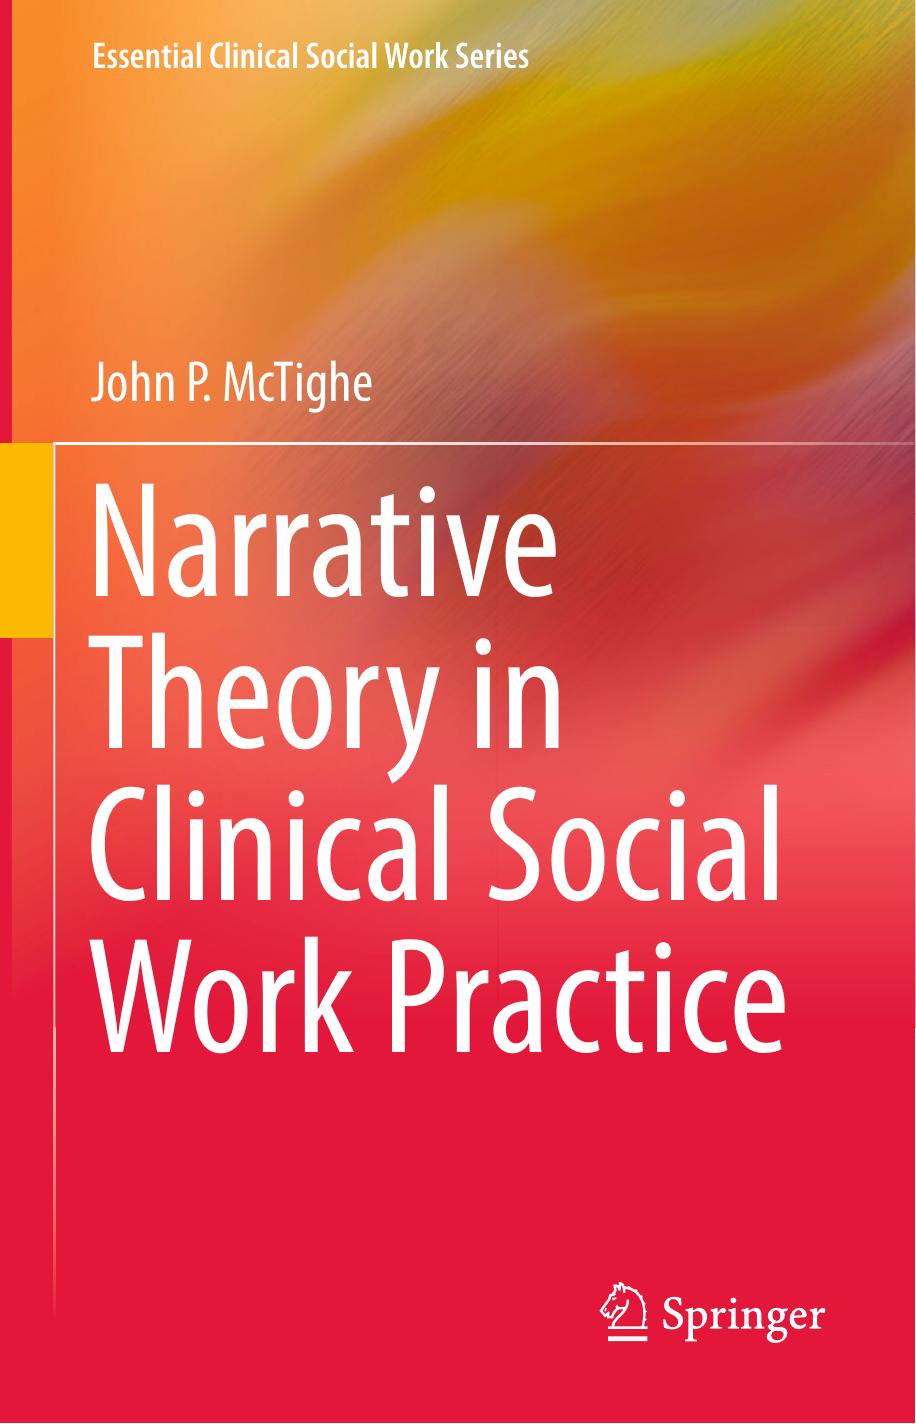 Narrative Theory in Clinical Social Work Practice 2018